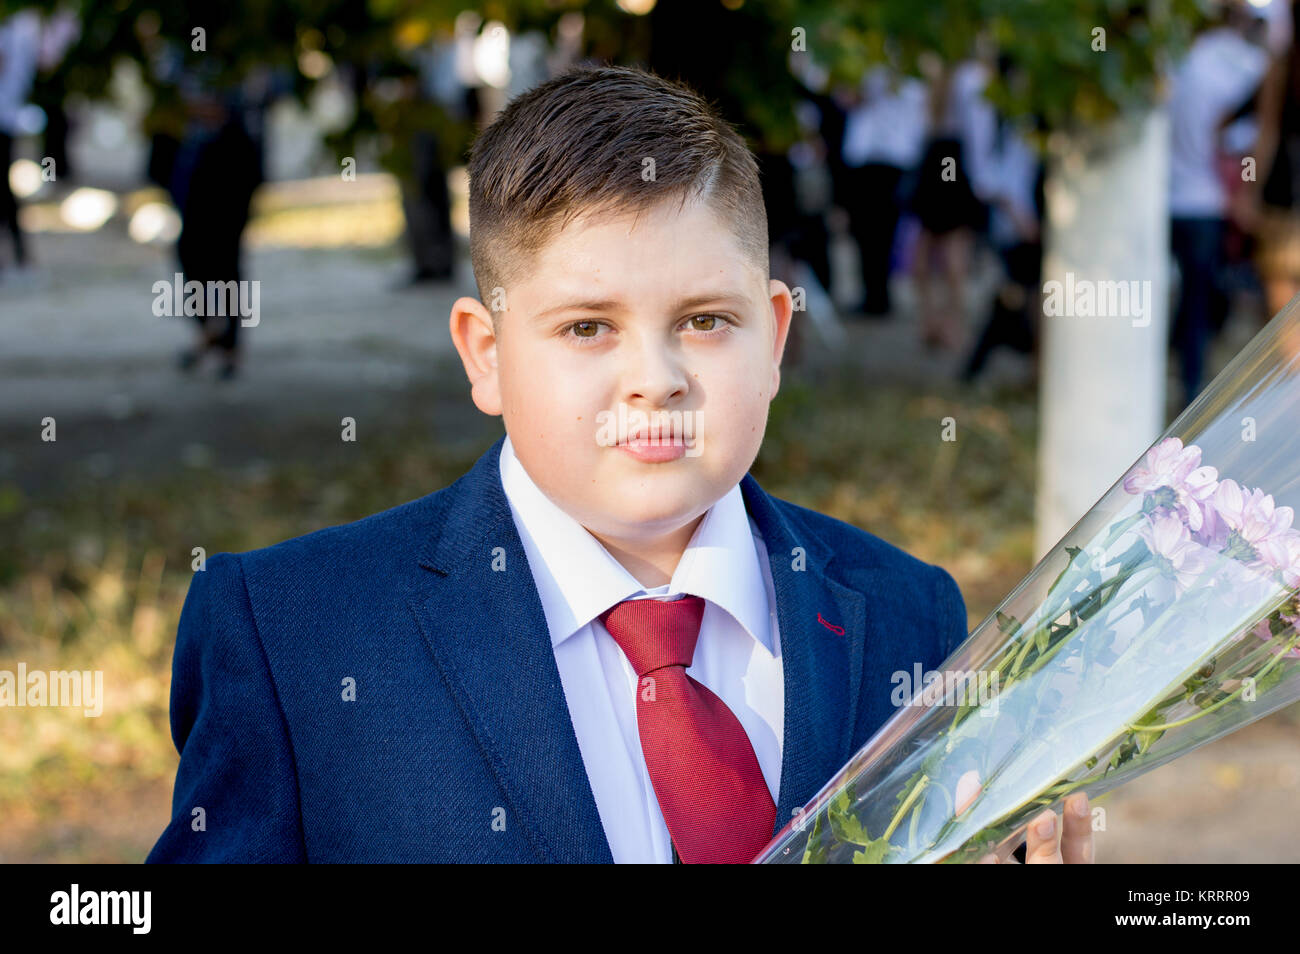 the school student in a claret tie with a bouquet Stock Photo